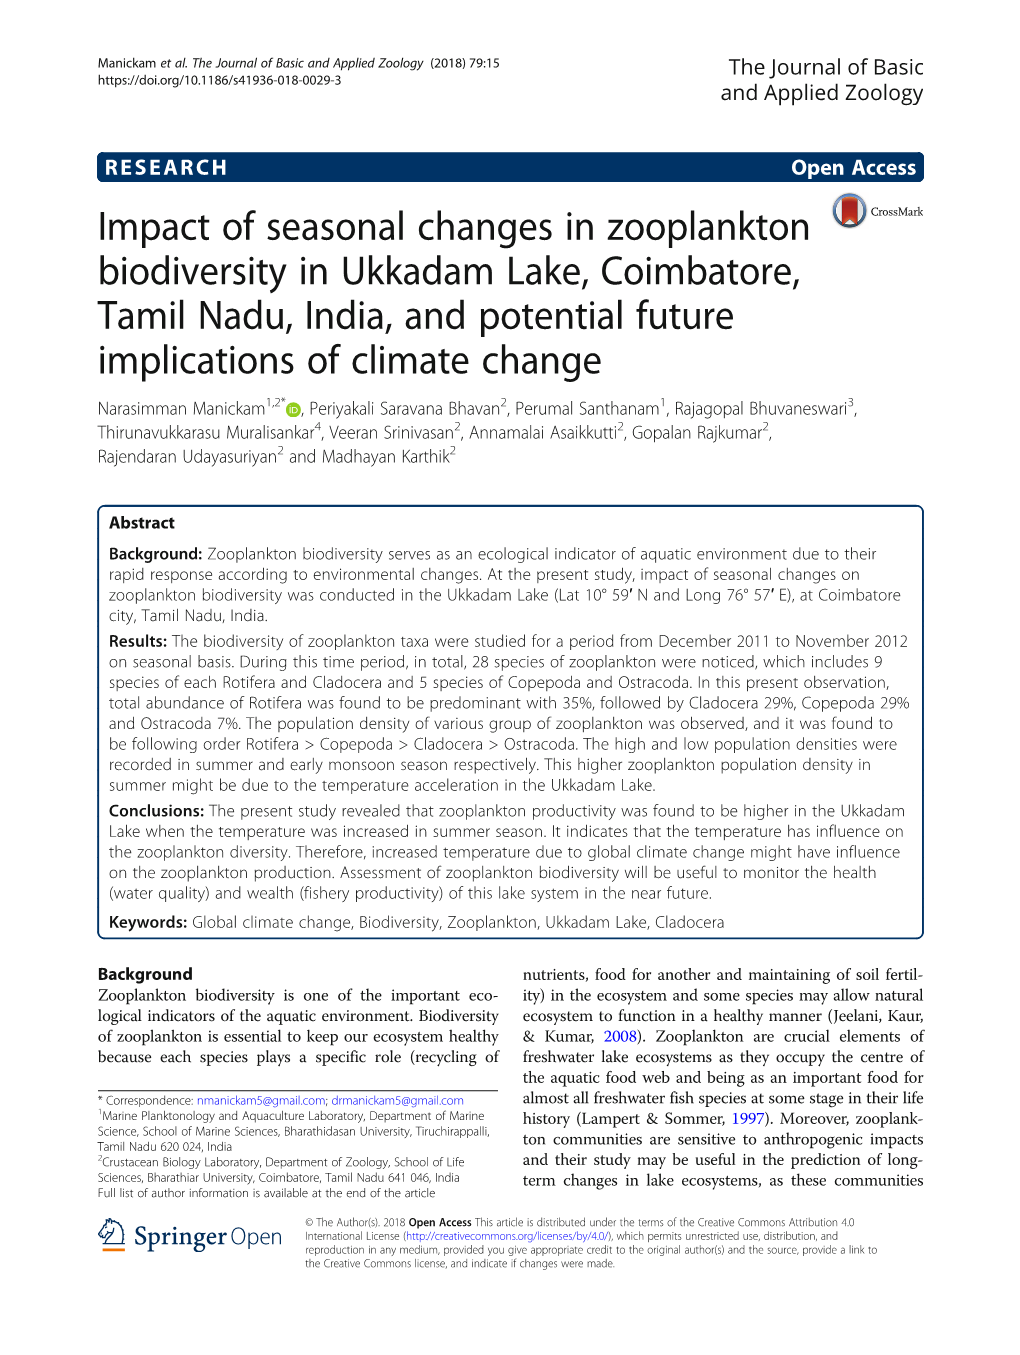 Impact of Seasonal Changes in Zooplankton Biodiversity In